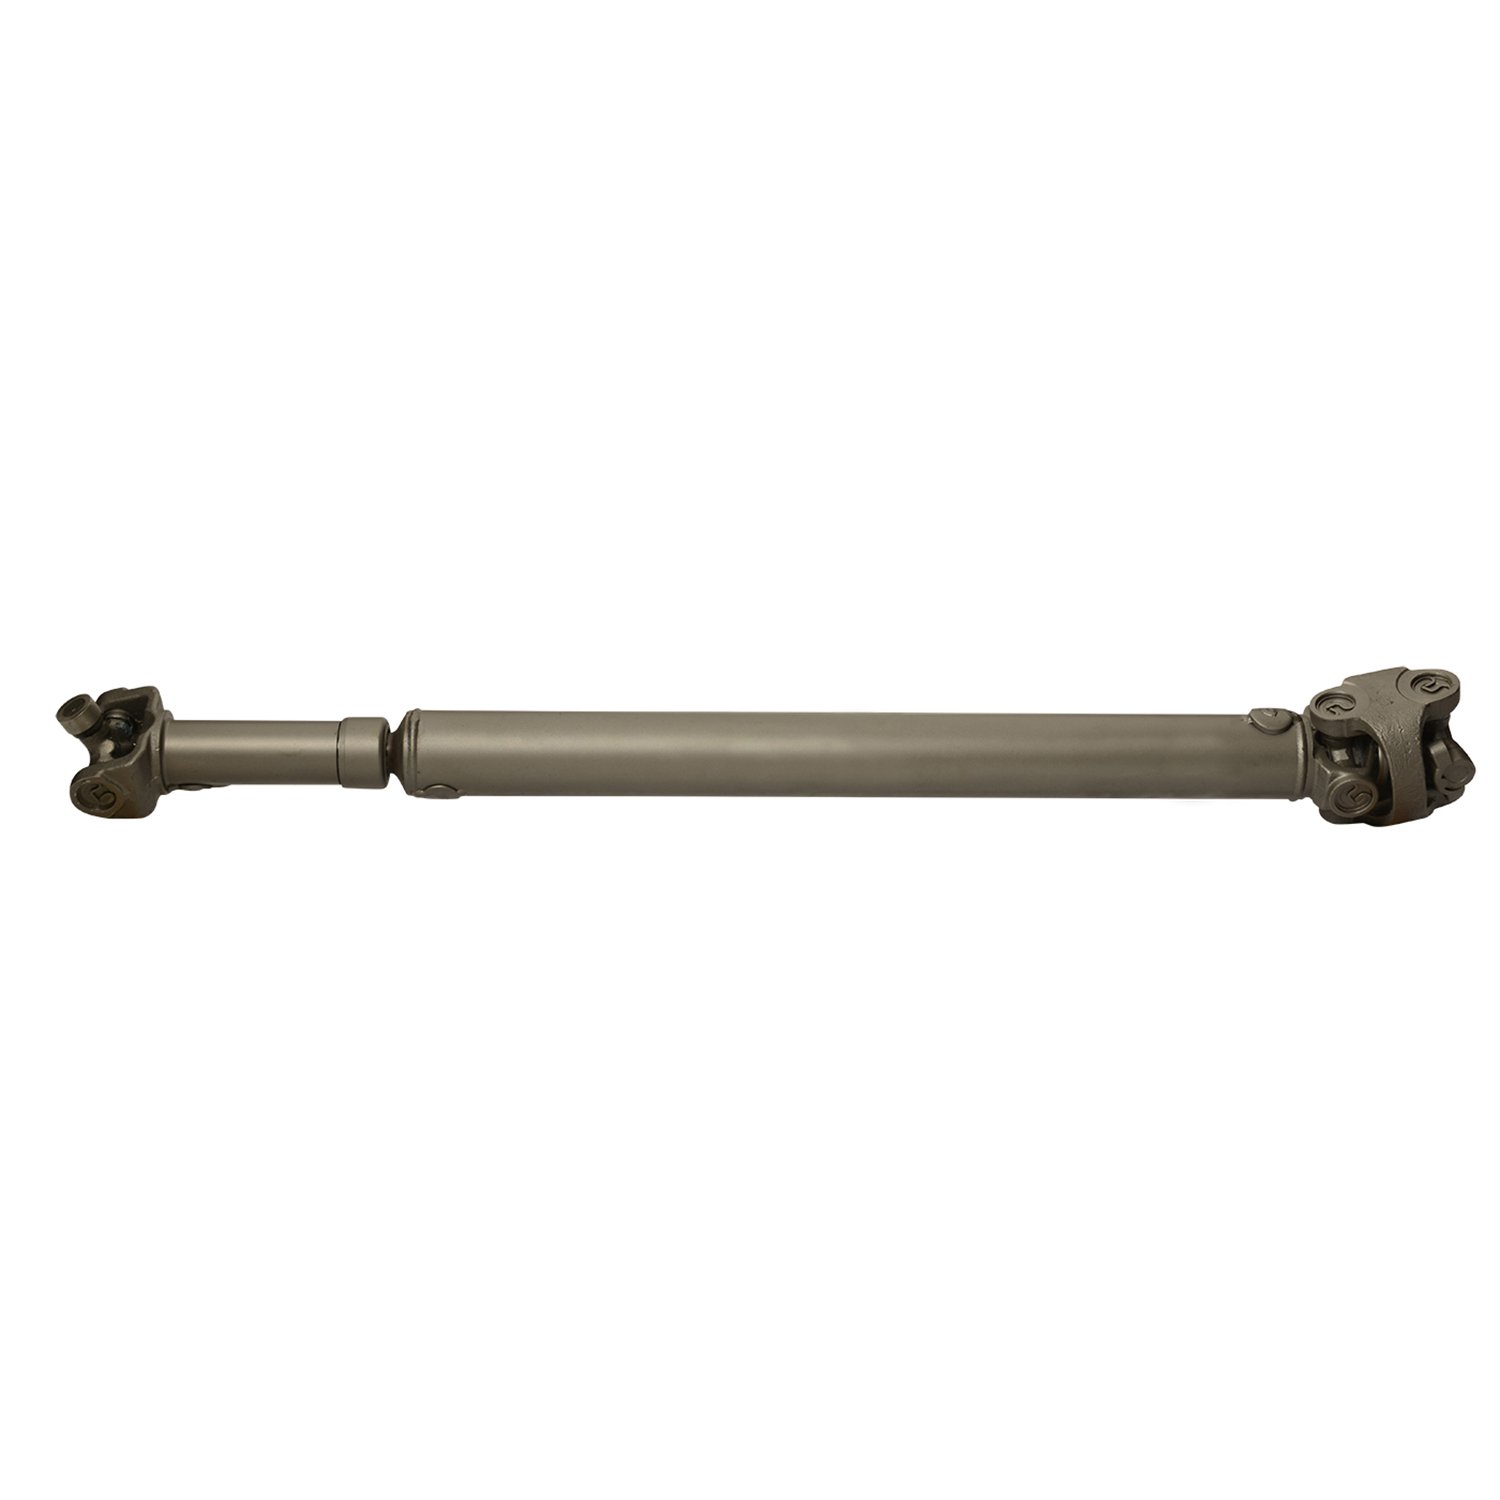 USA Standard ZDS9446 Front Driveshaft, For F350, 36-1/4 in. Center-To-Center